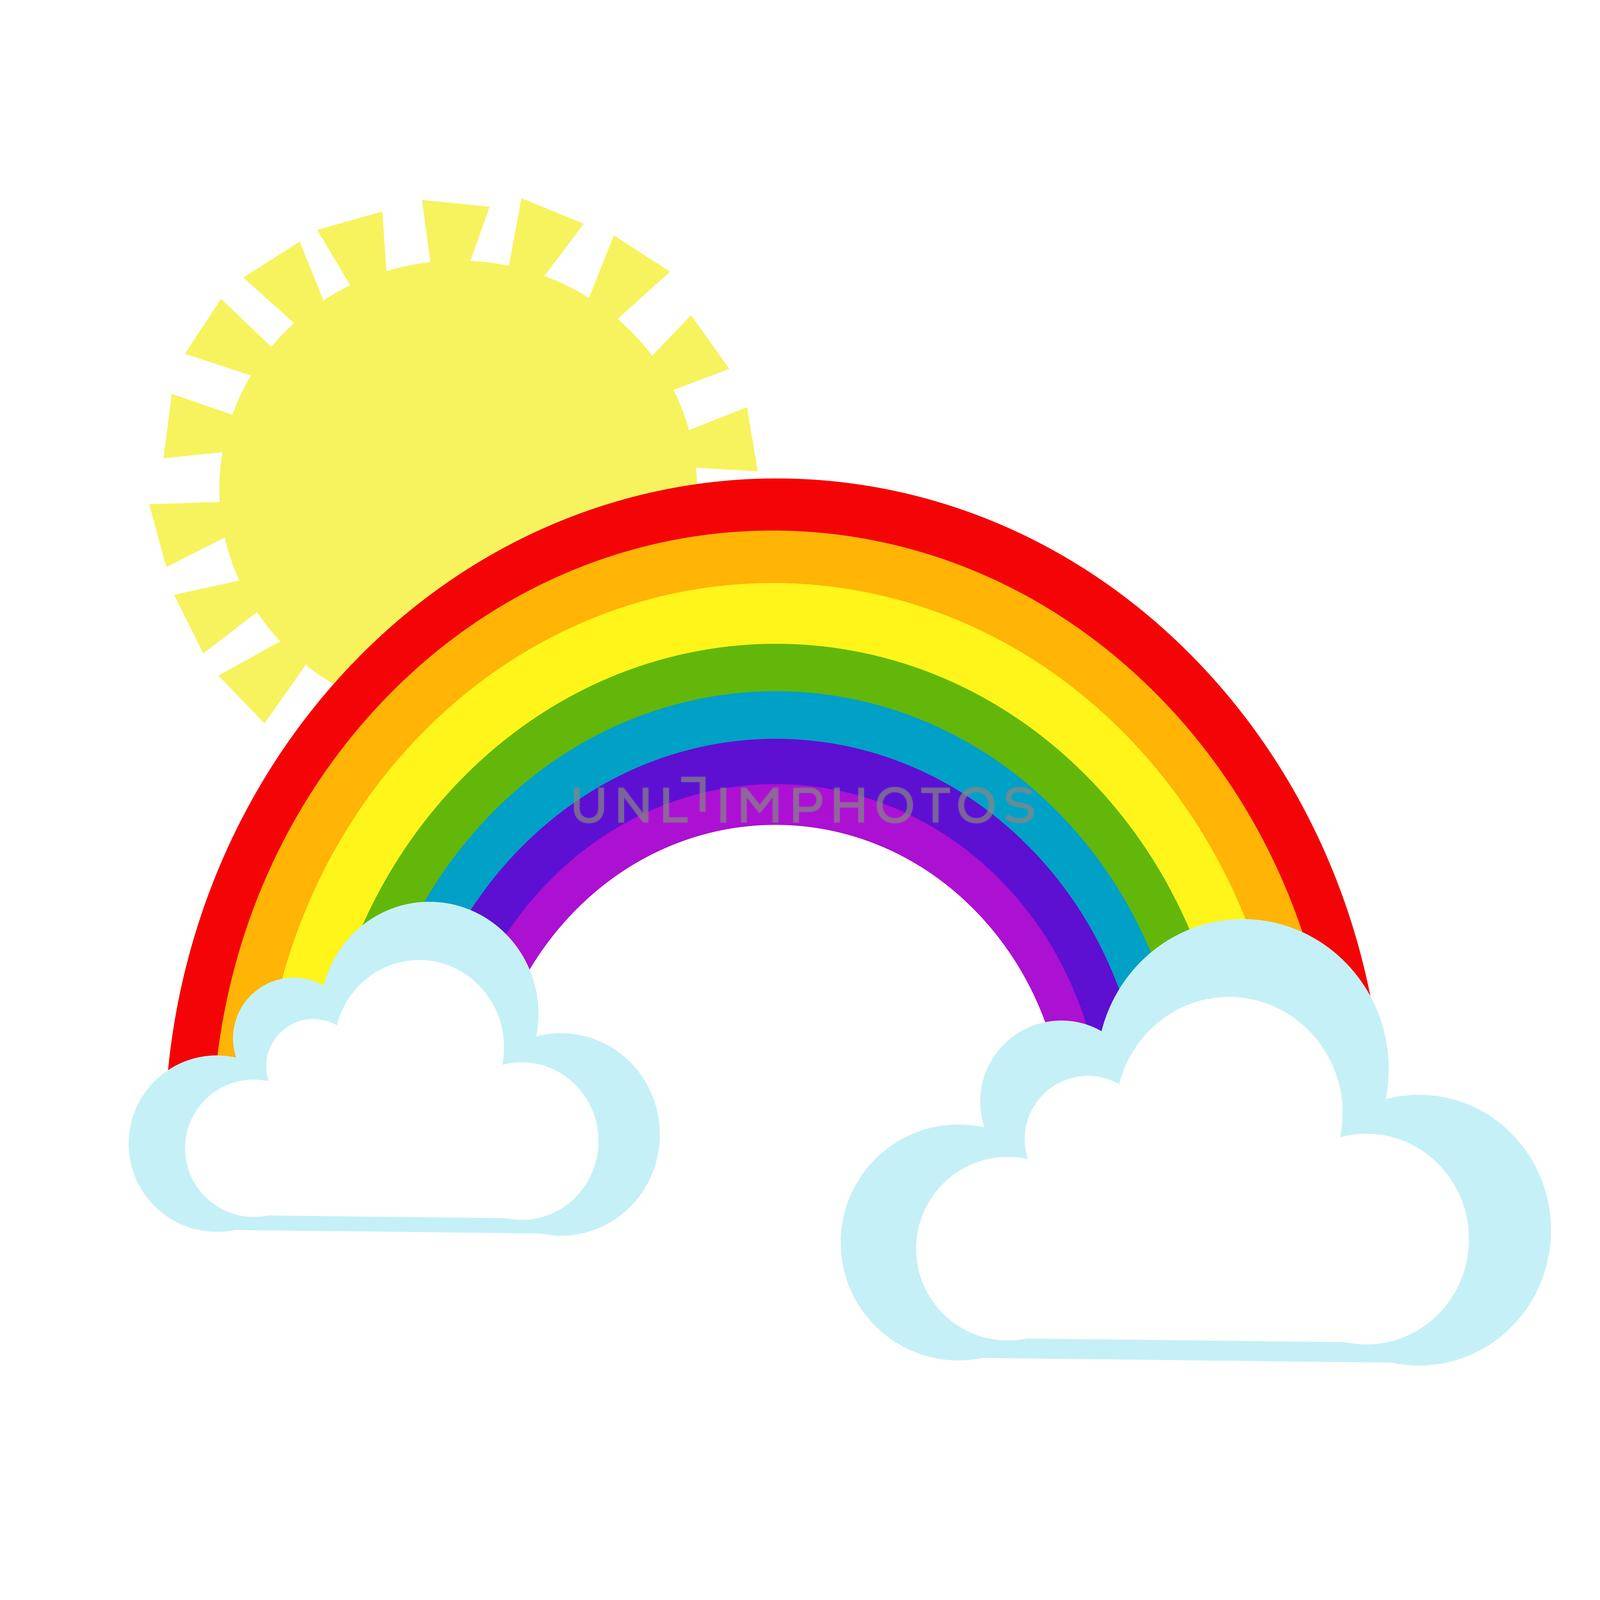 Flat cartoon illustration of rainbow with sun and clouds by hibrida13